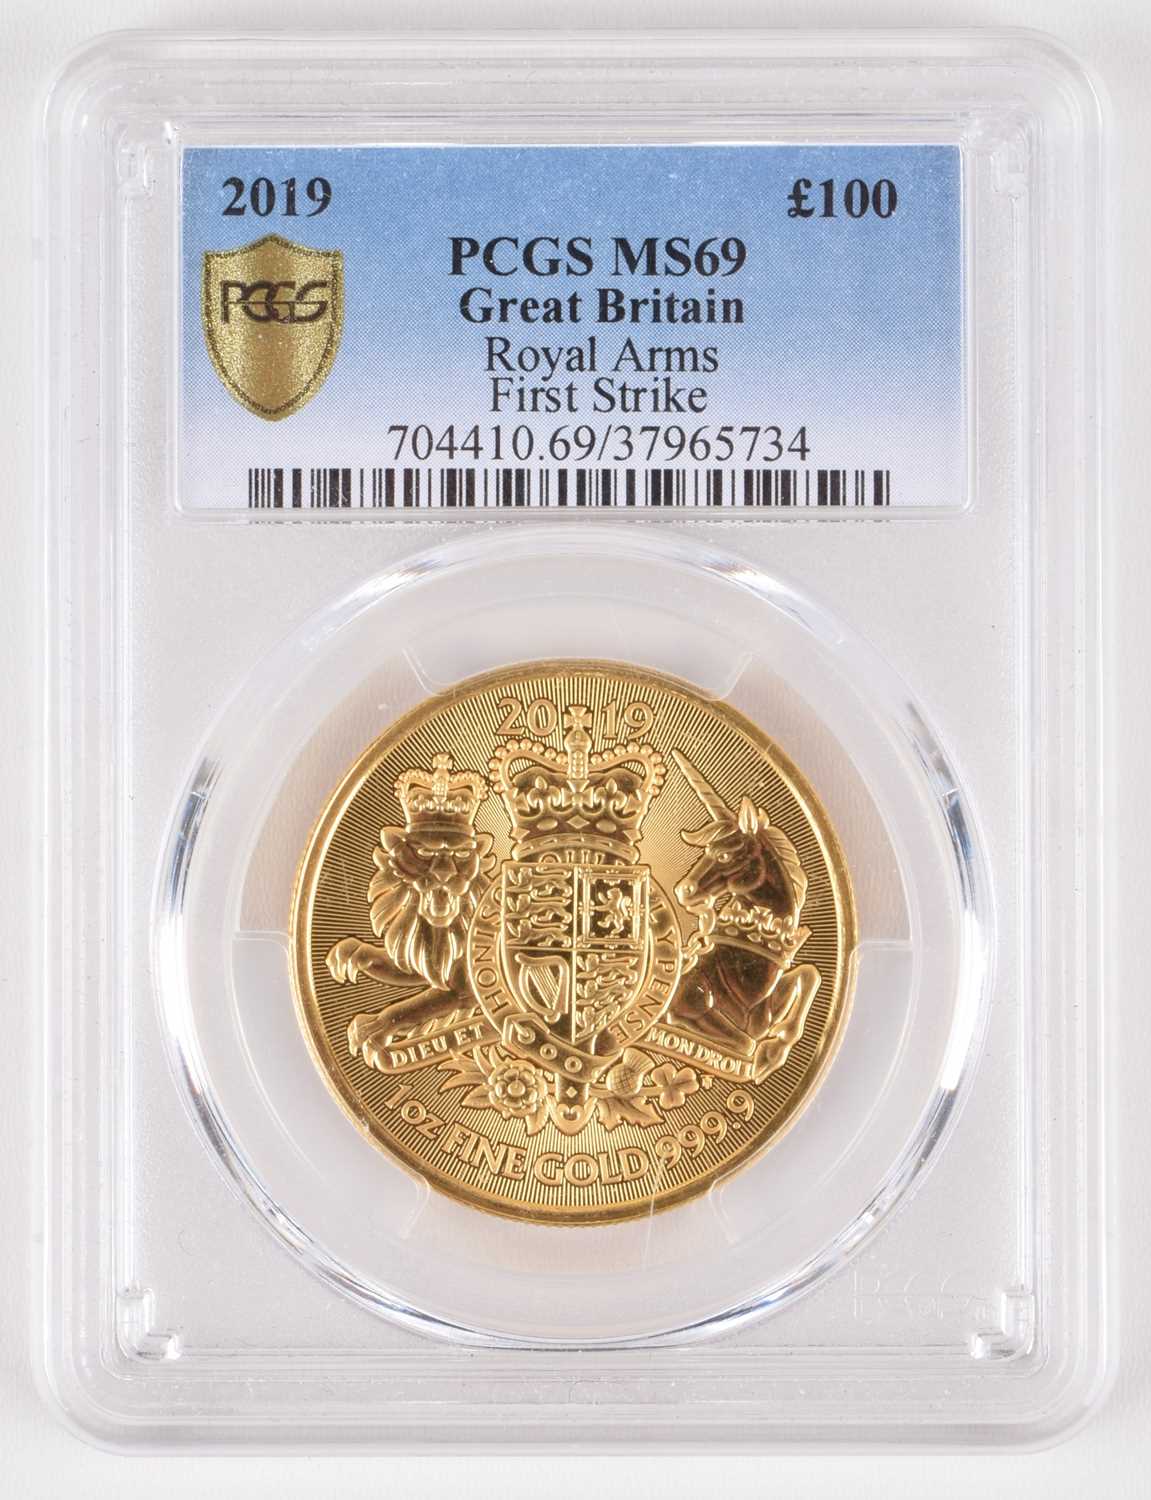 Lot 84 - Queen Elizabeth II, 100 Pounds, 2019, Royal Arms, graded as MS69.